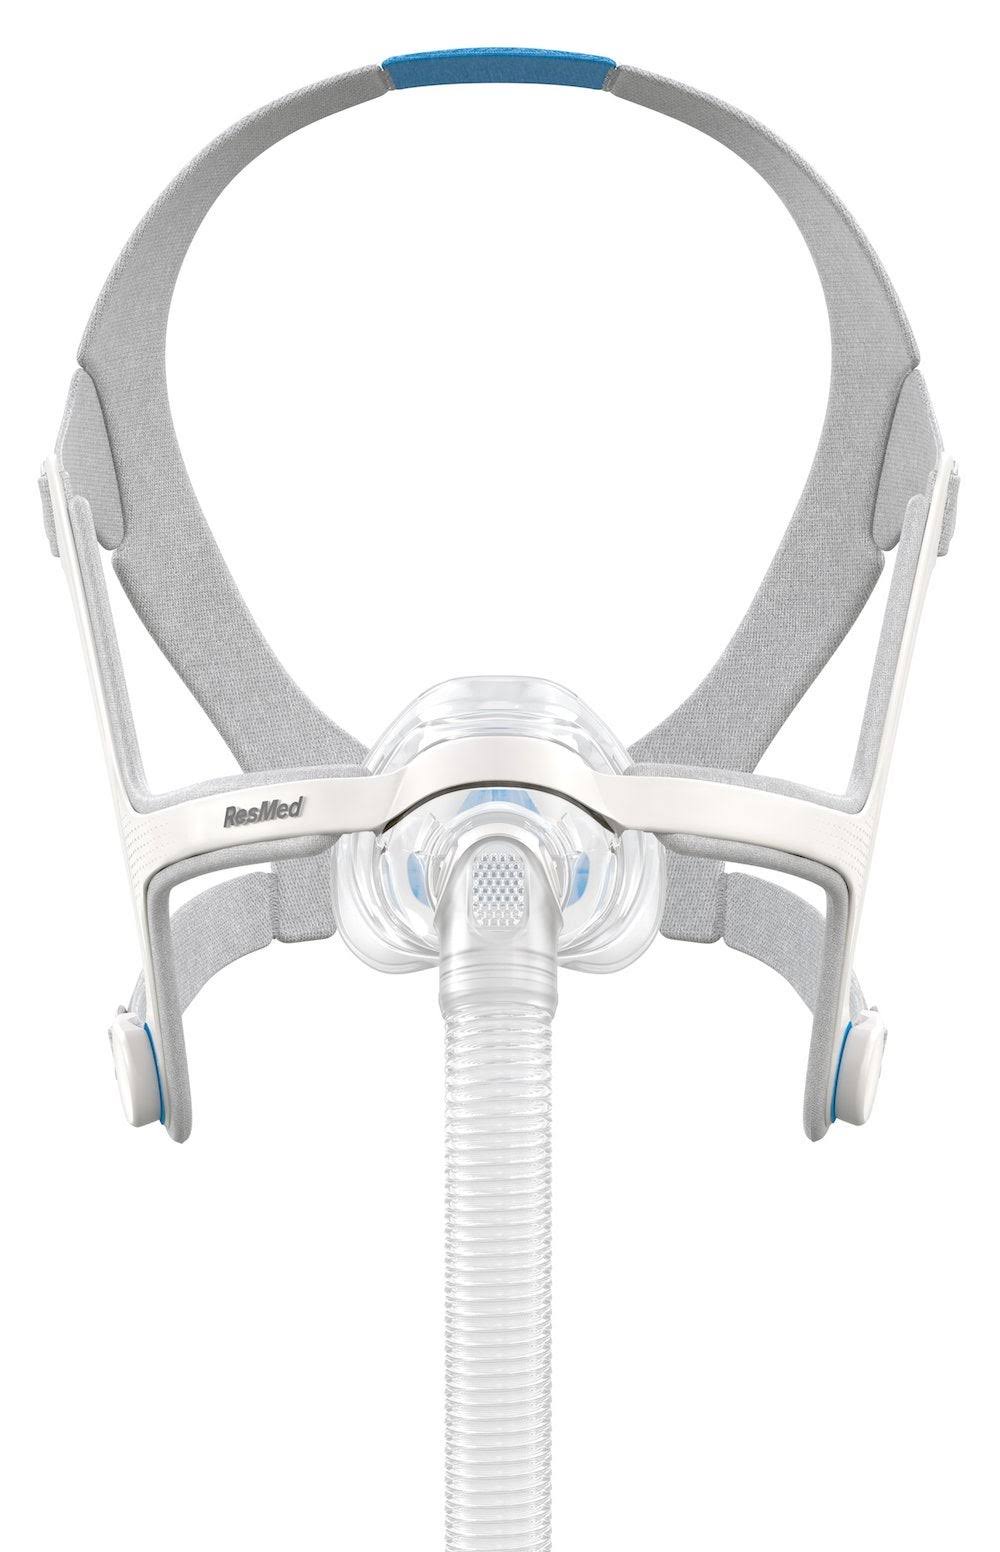 AirFit N20 Nasal Cpap Mask by ResMed Size Large